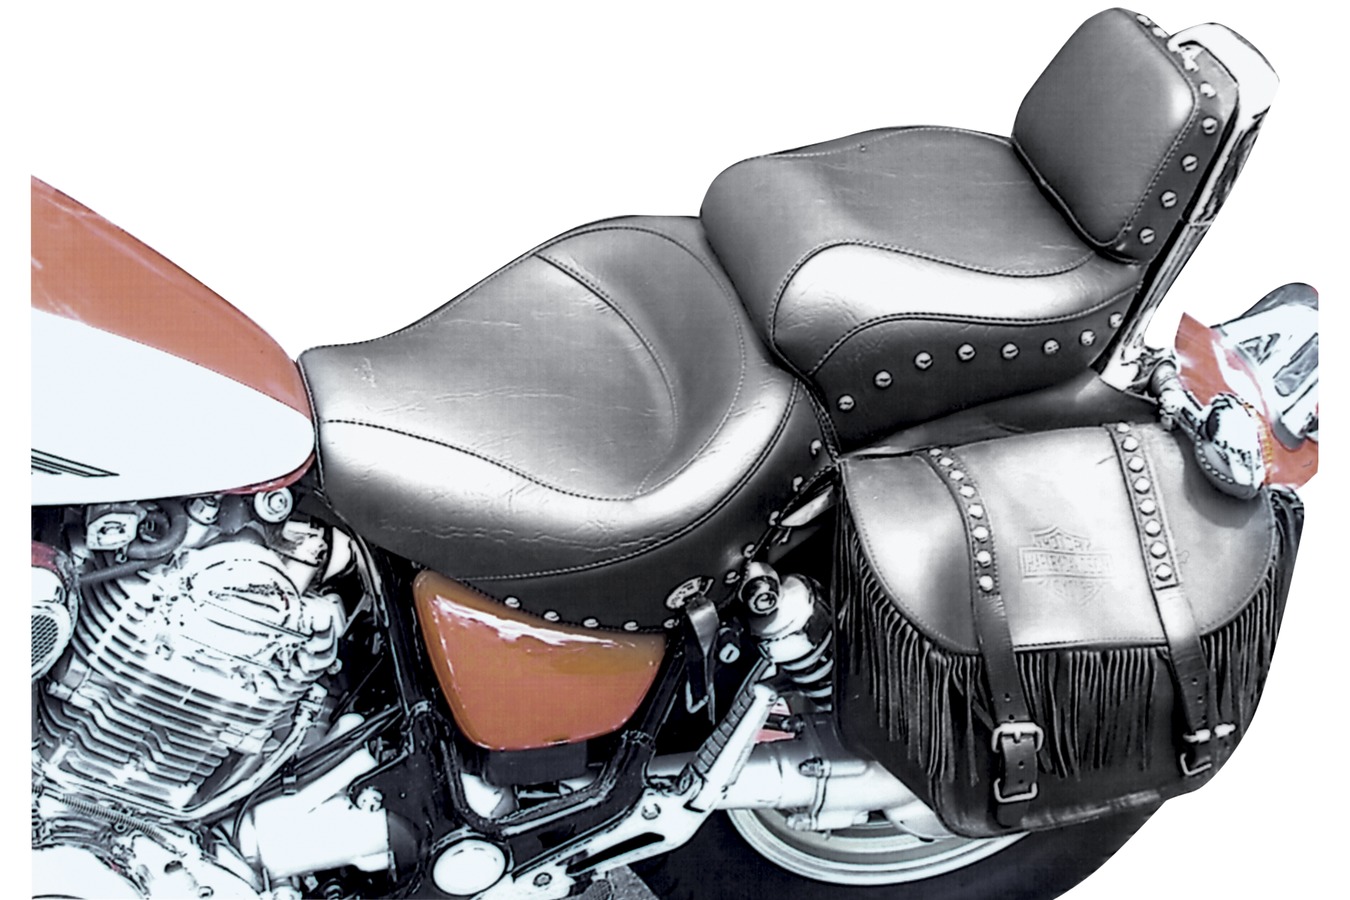 Wide Touring One-Piece Seat for Yamaha Virago 700 1984-